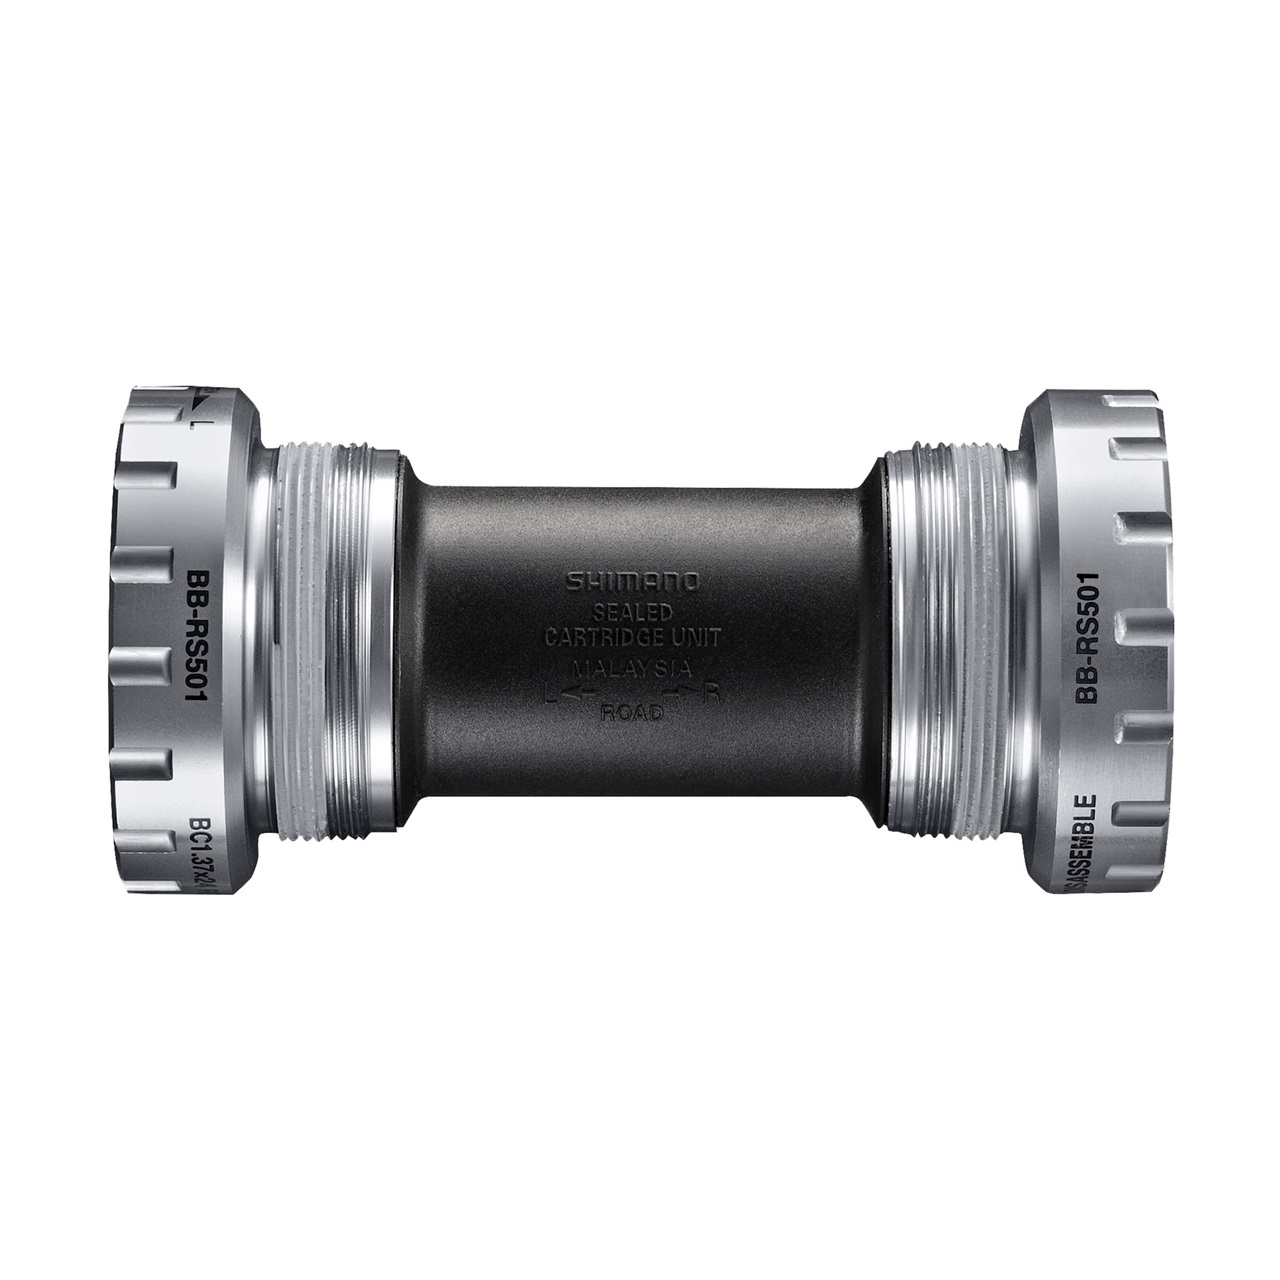 Shimano vevlager BB-RS501 road